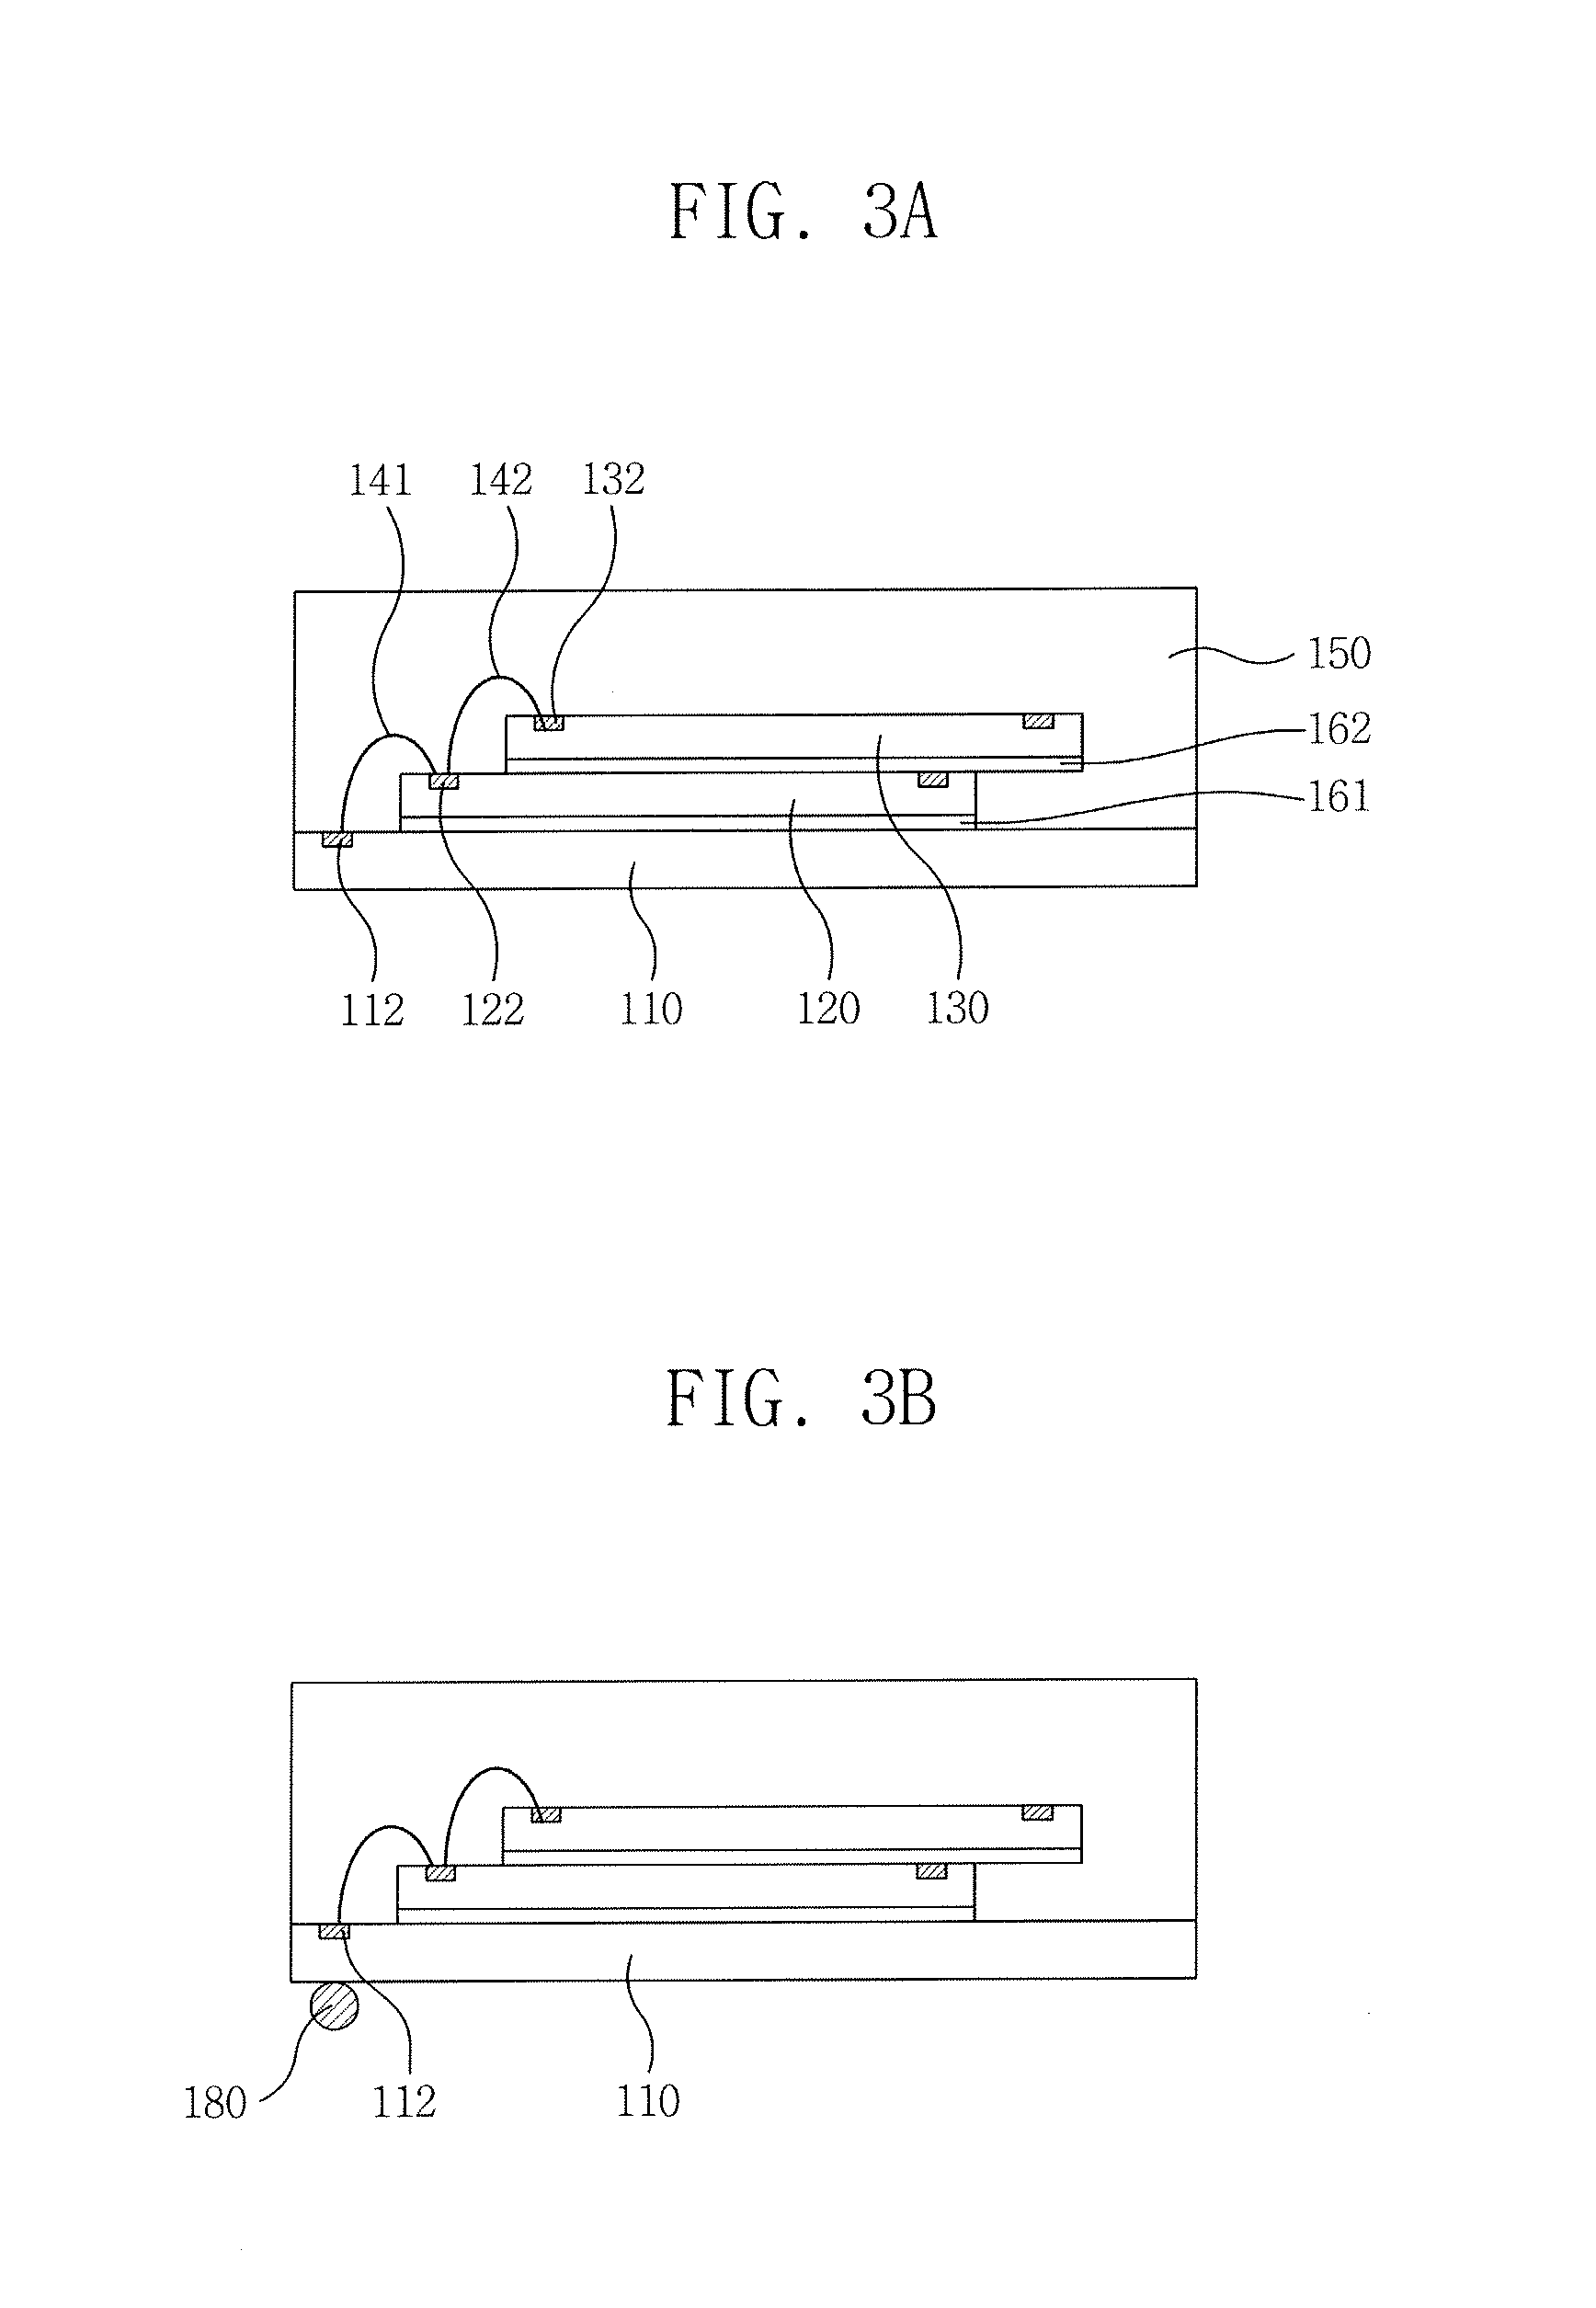 Semiconductor package having a stacked structure